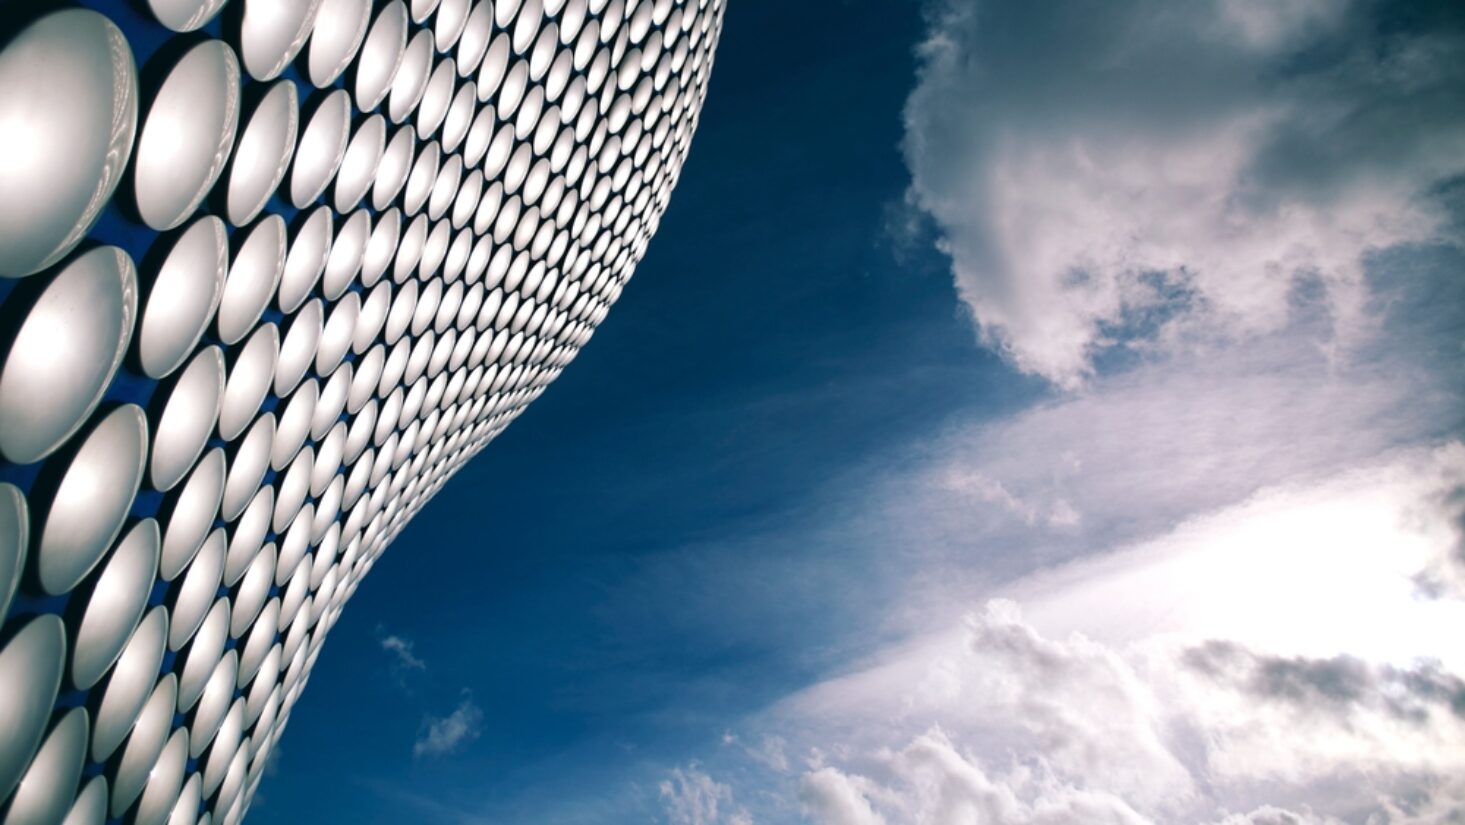 Birmingham attractions for photography lovers